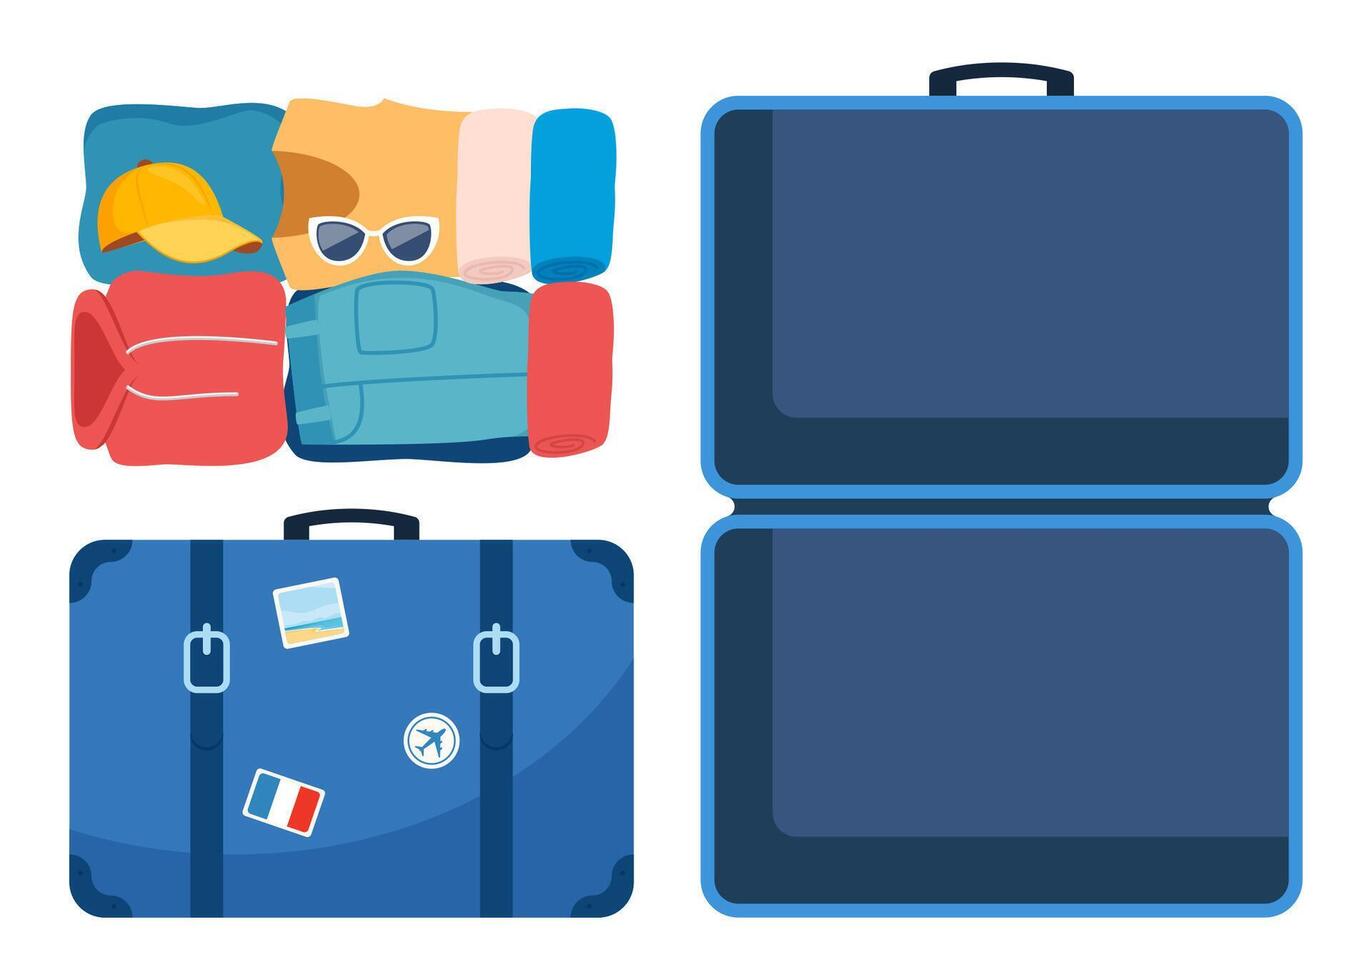 Suitcase, open and closed, ready for packing. Front and top view. Preparing for the trip. Packed clothes for travel. Clothing, footwear and accessories. Personal belongings. Vector illustration.